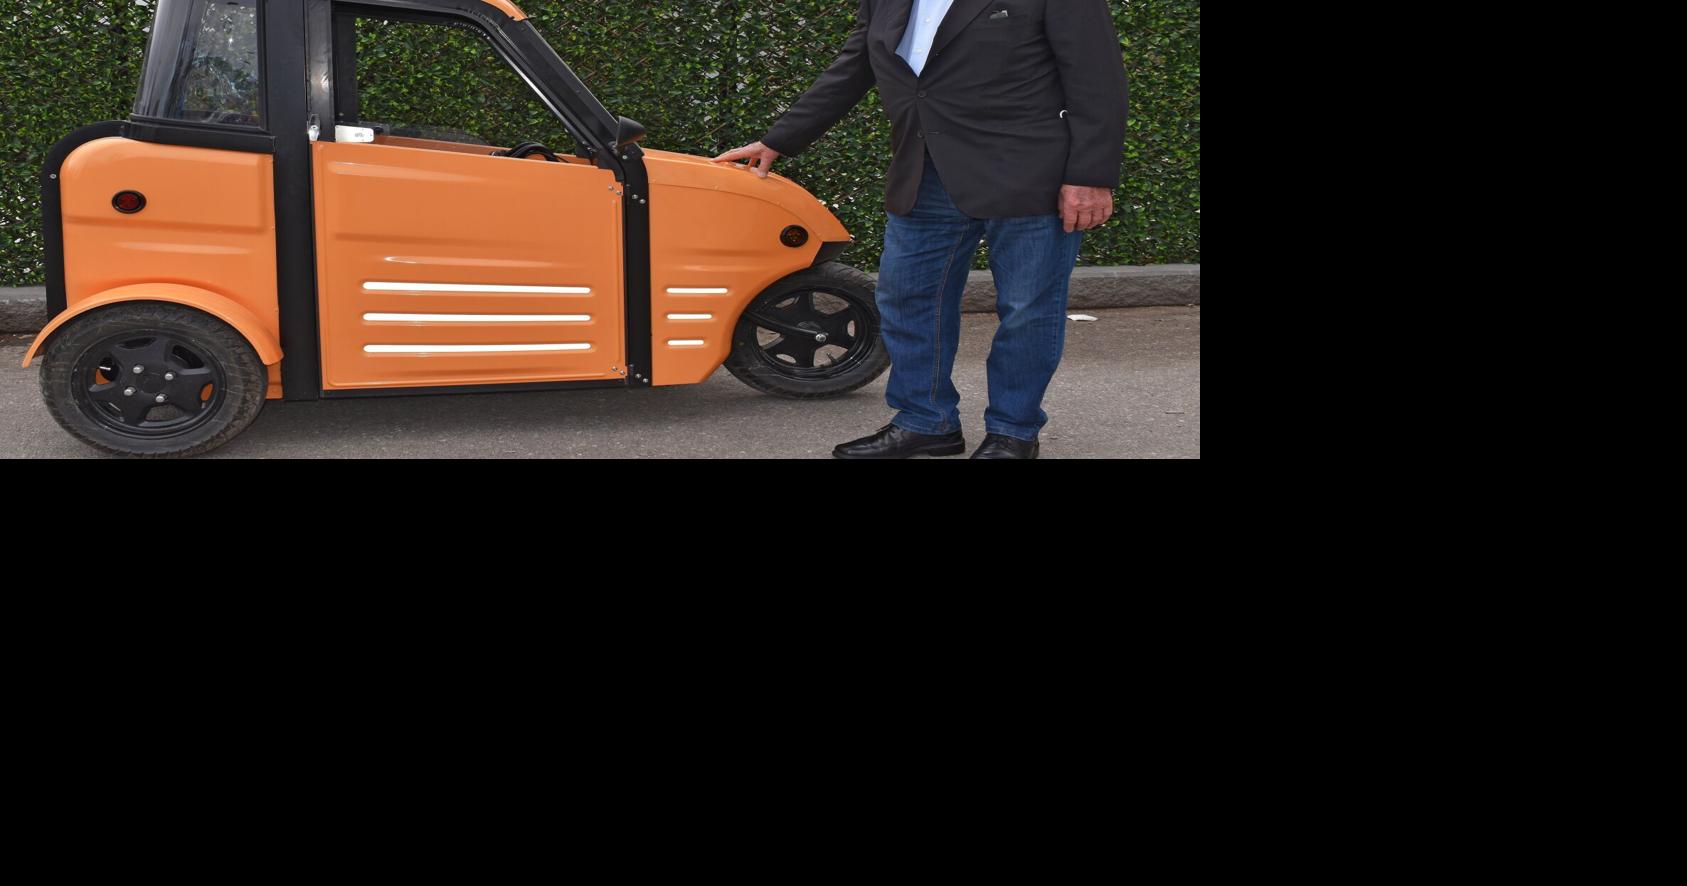 'This is a godsend' Frank Stronach's electric vehicle factory in